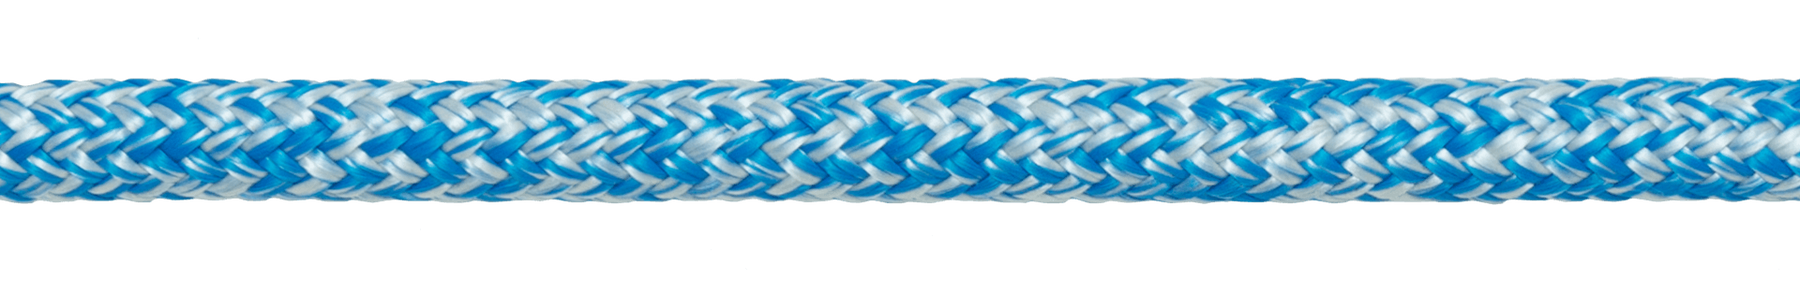 Southern Ropes' Super Braid